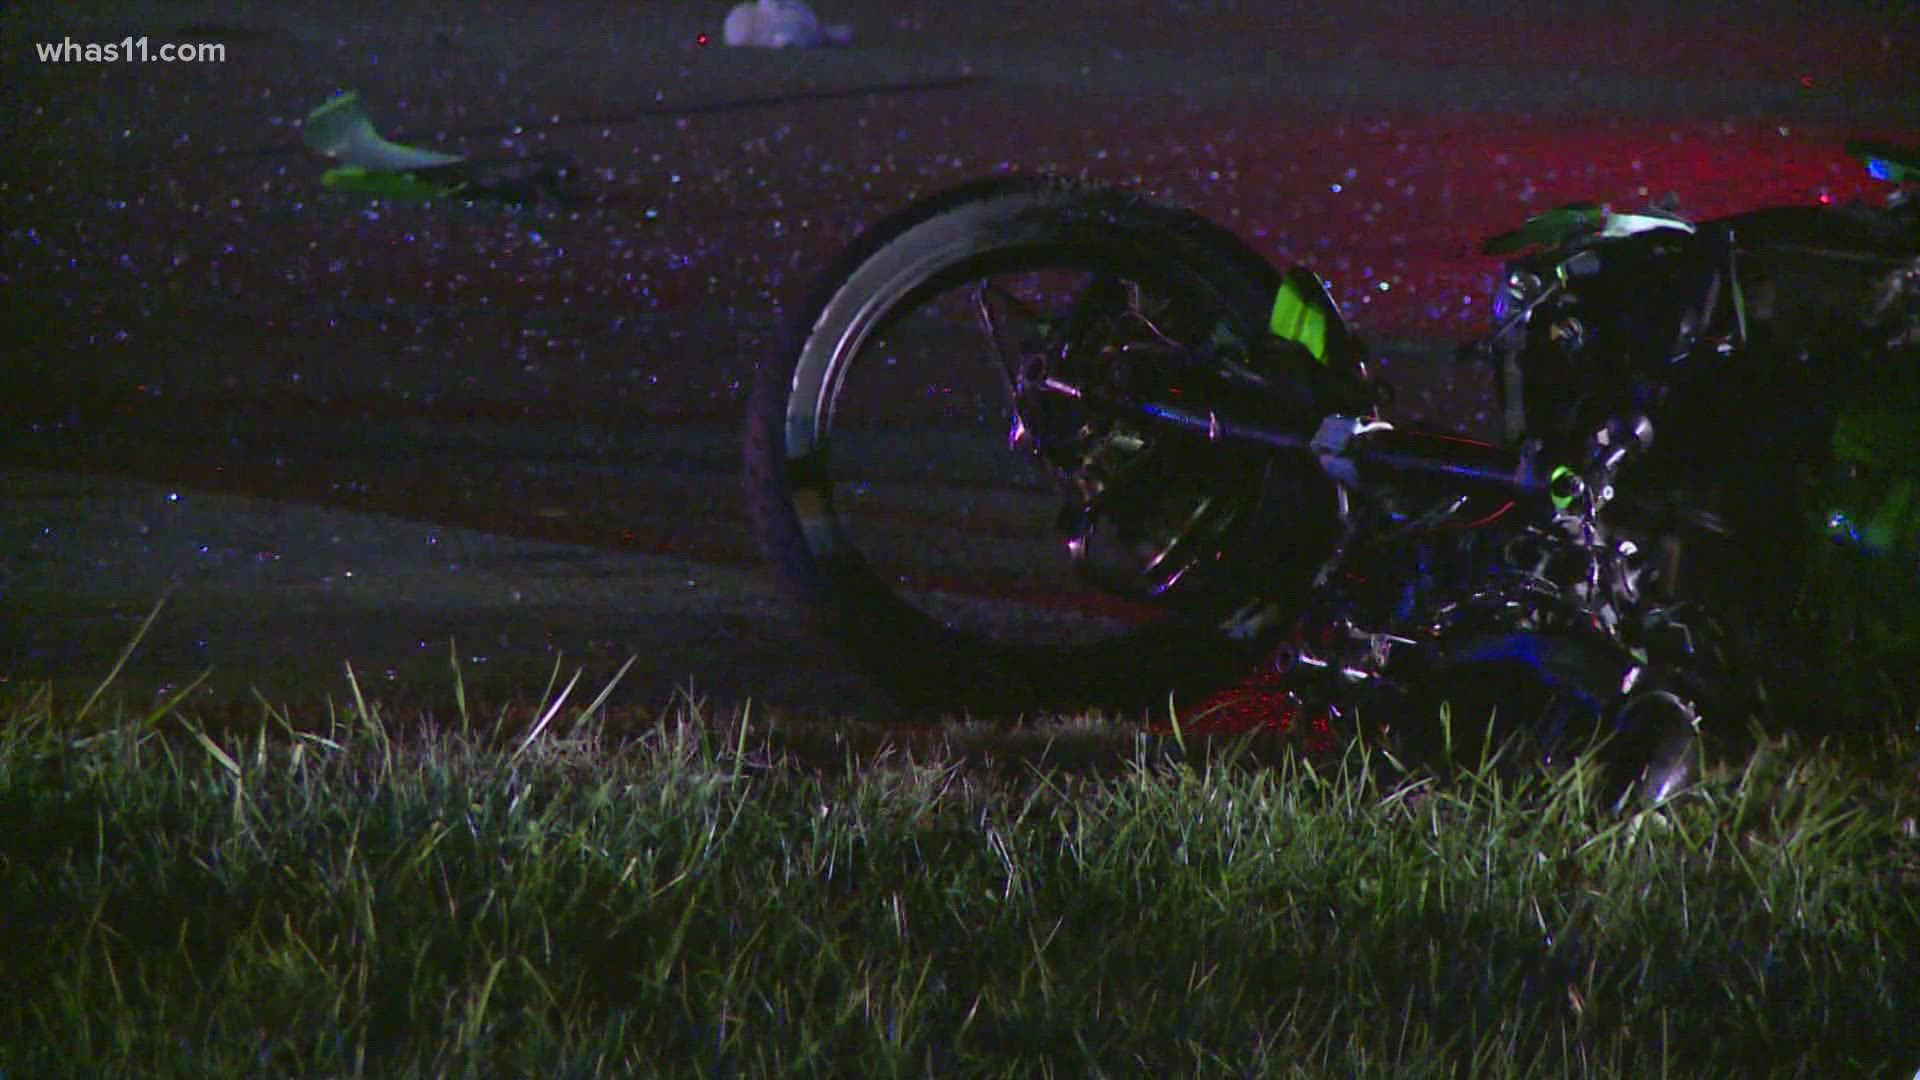 Police said a motorcyclist was killed after colliding with a car near Raggard Road Sunday evening.